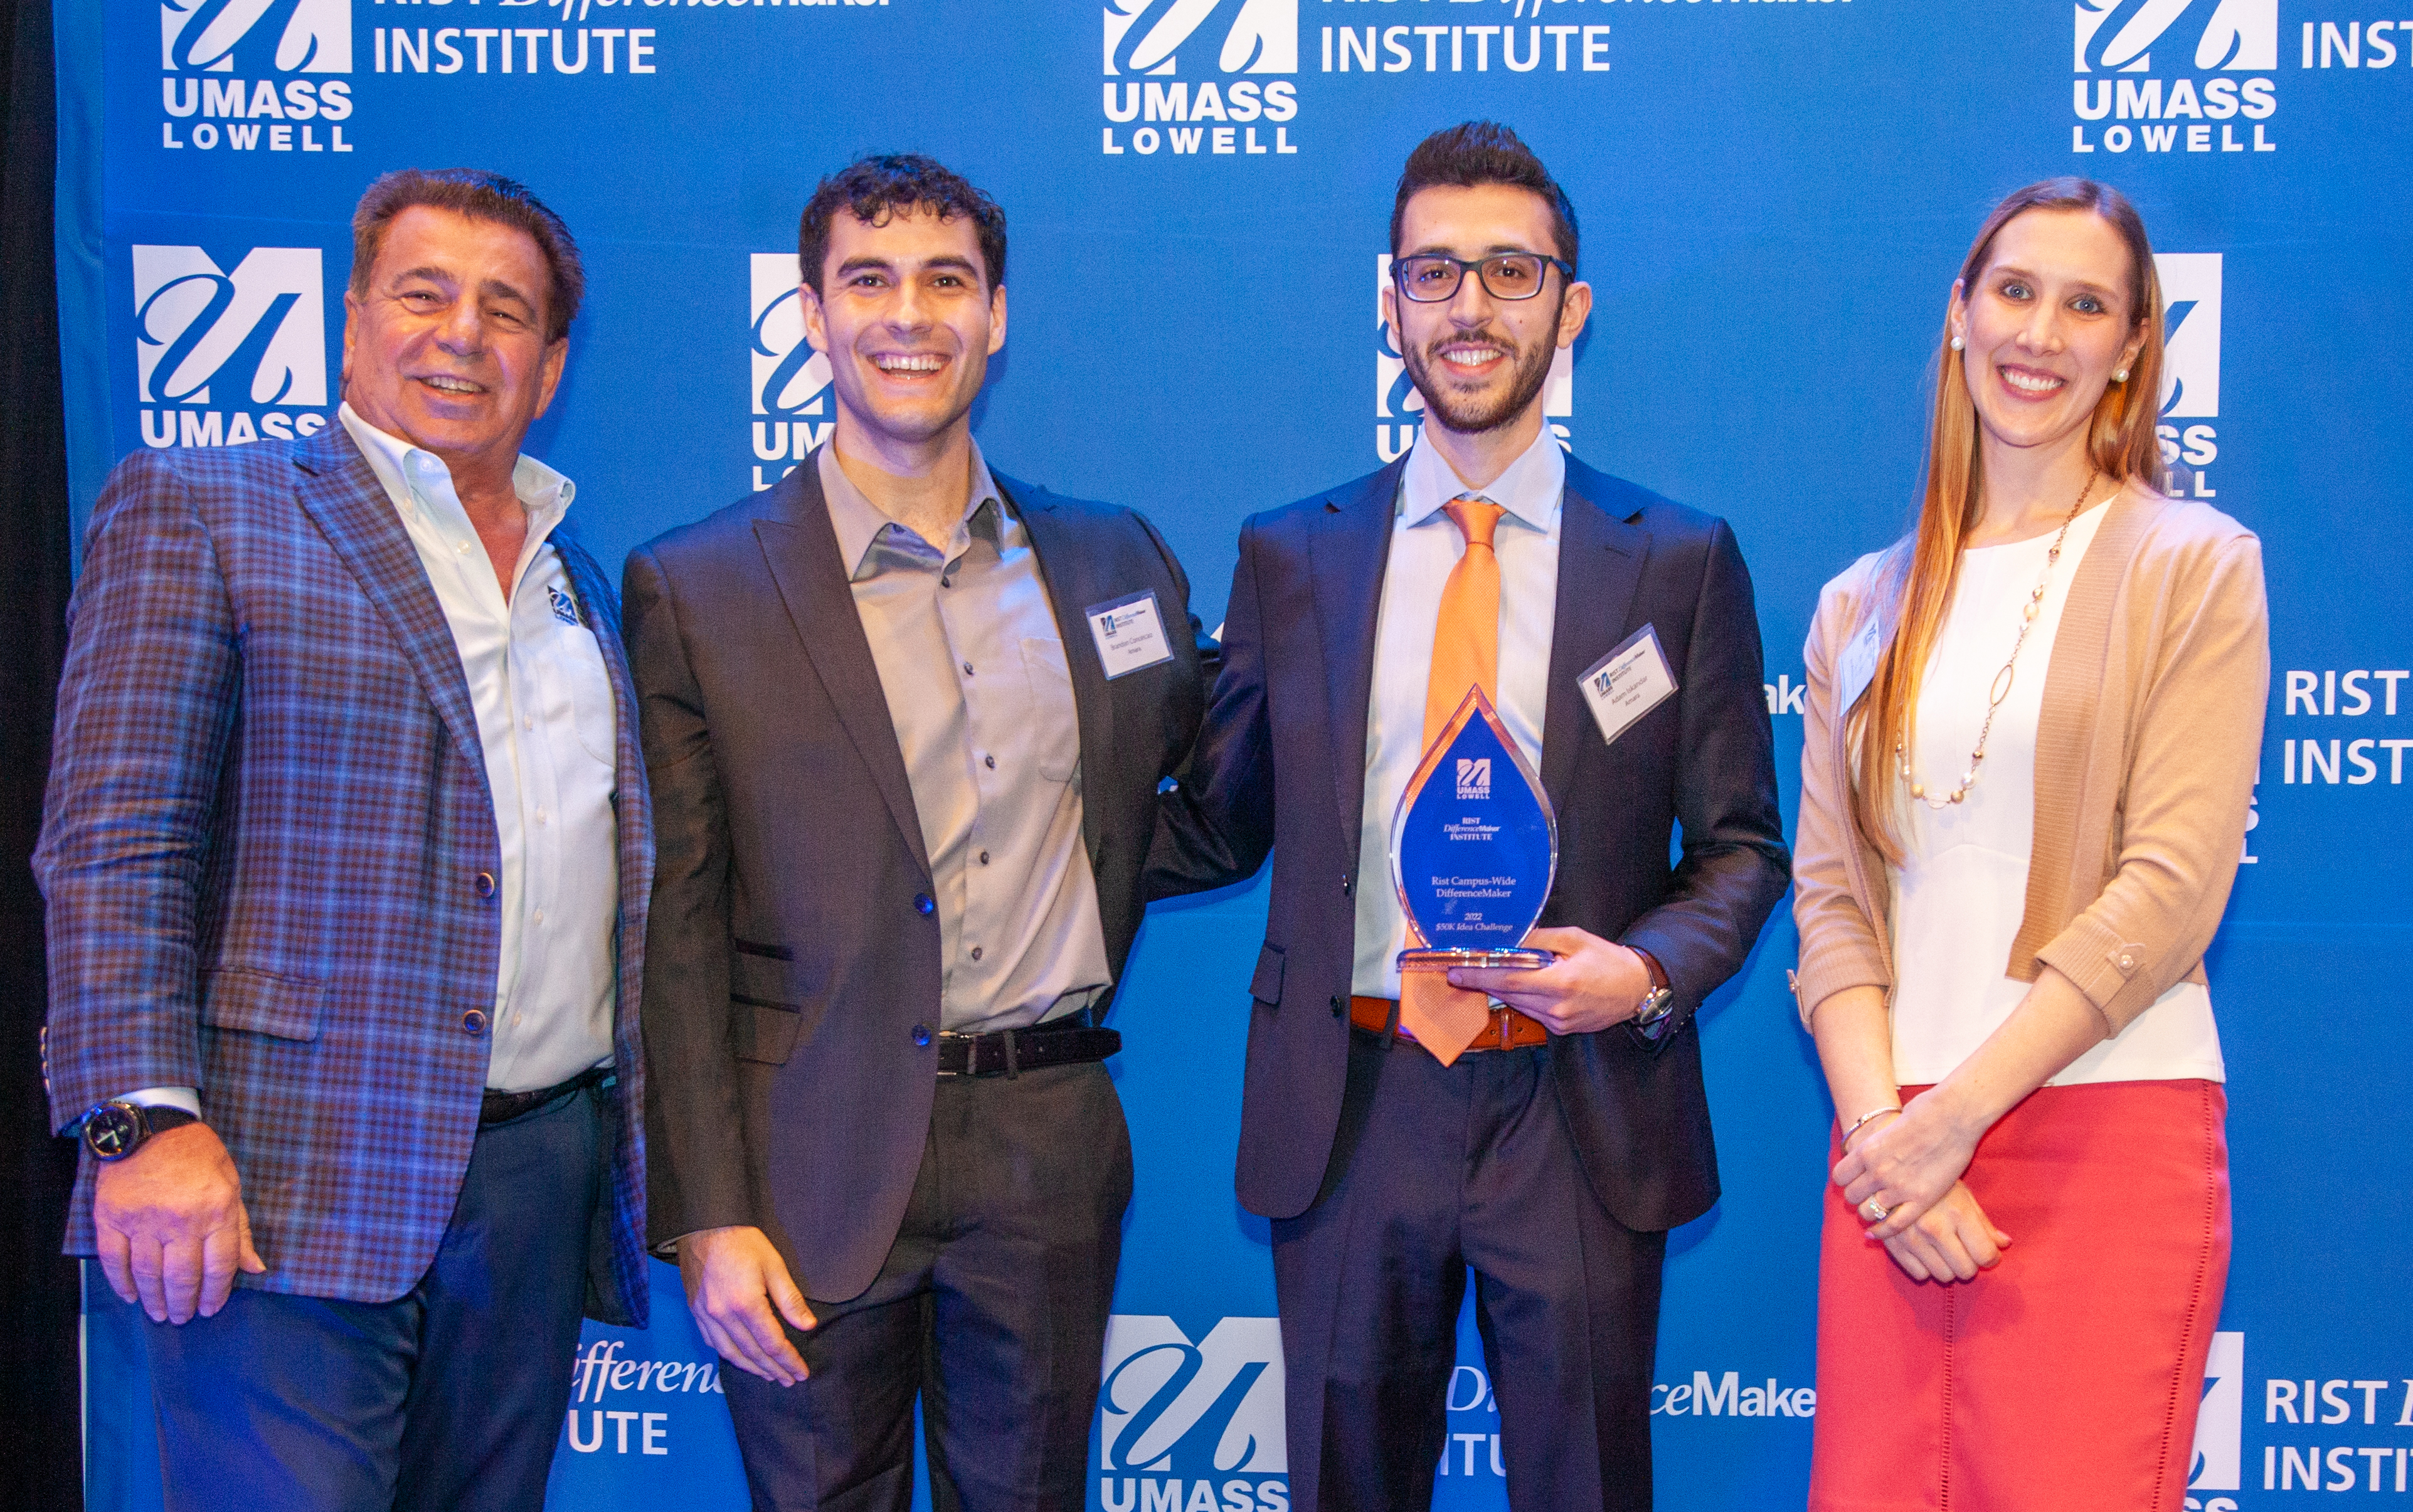 2 male students from the AMARA team holding an award pose with Brian Rist and Holly Lalos of Difference Makers against a blue UMass Lowell backdrop.